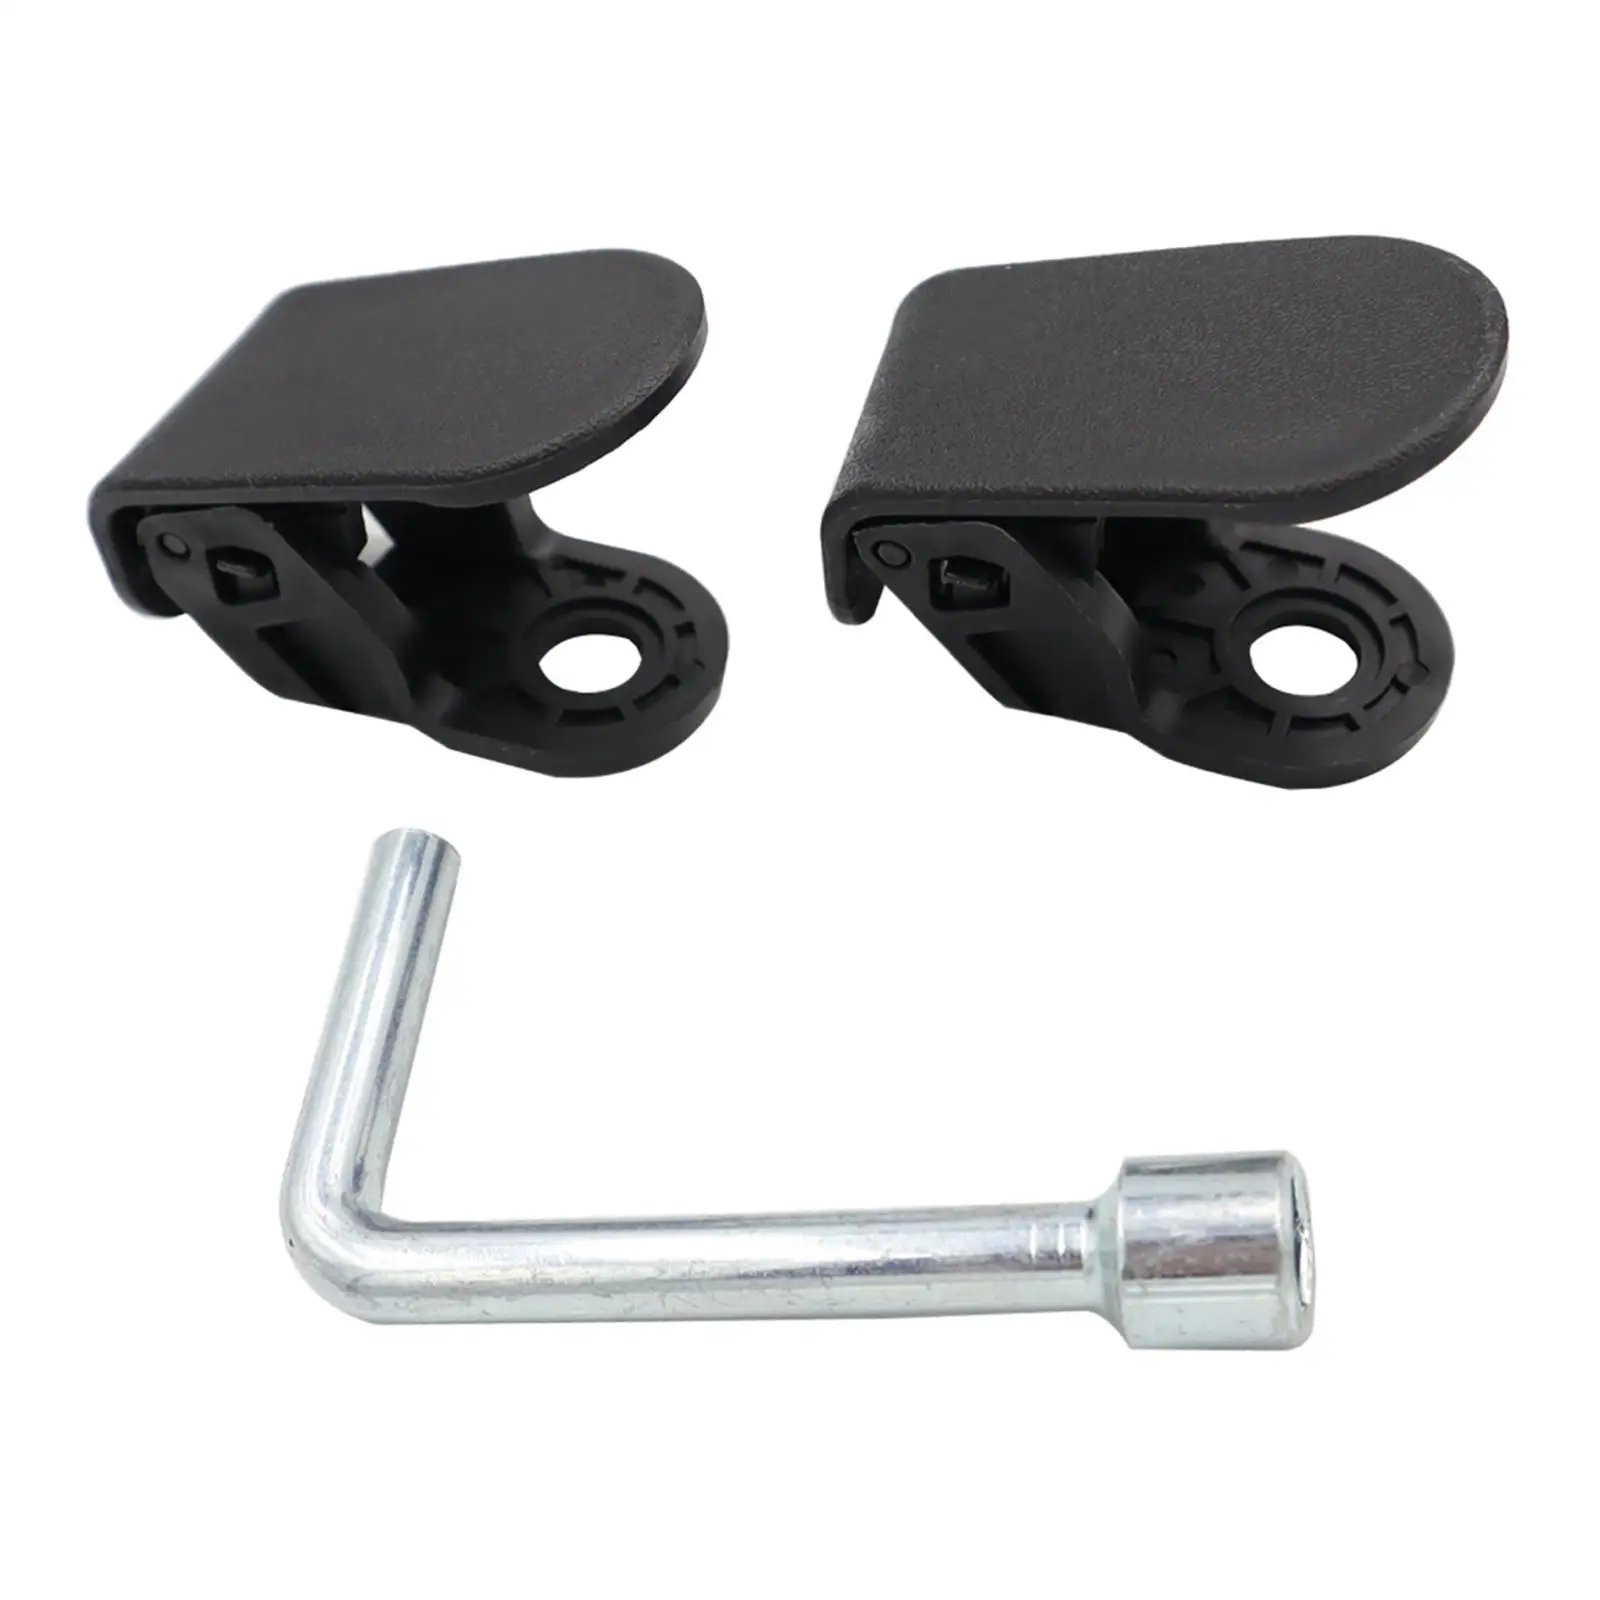 2 Pieces Car Front Trunk Hooks Concealed Clip Bolt Covers for Tesla Model 3 19-20 High Performance Car Interior Accessories